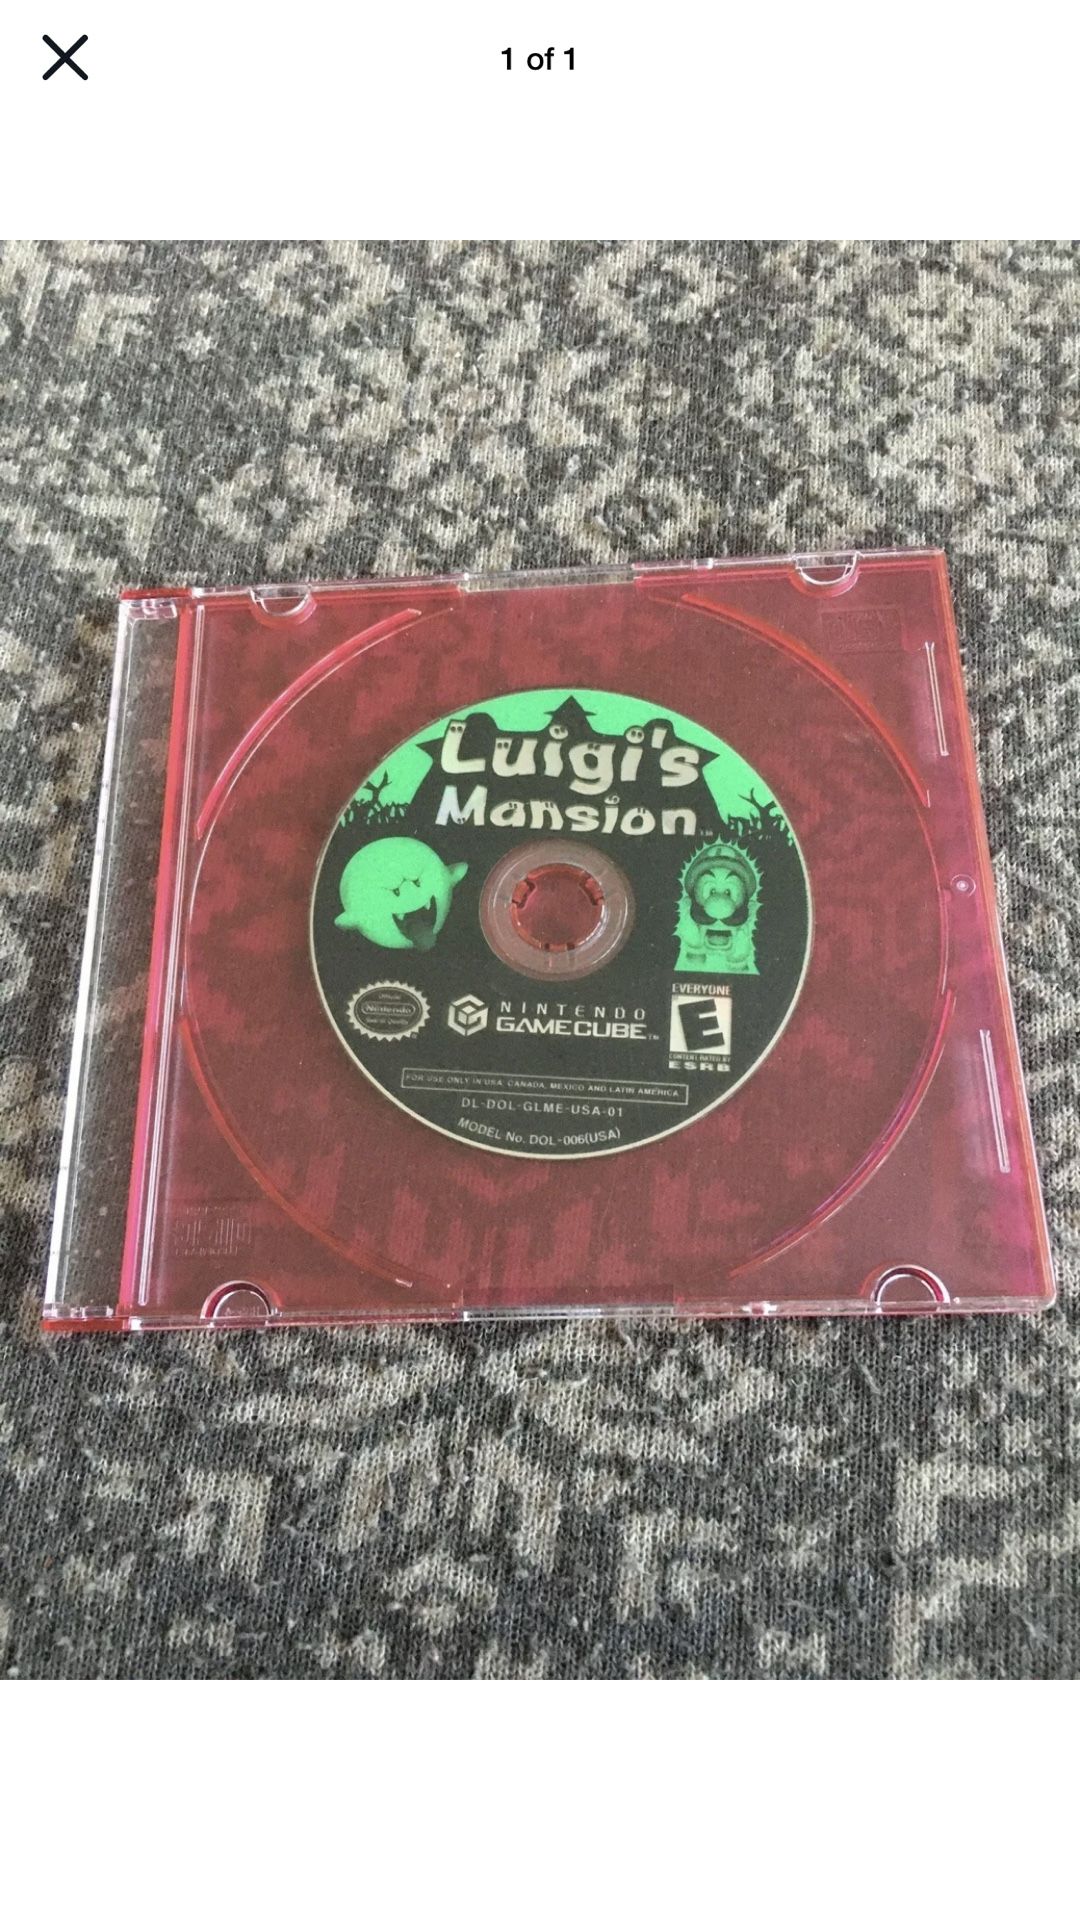 Luigis mansion.. looking for clean loose copy. Reasonable price